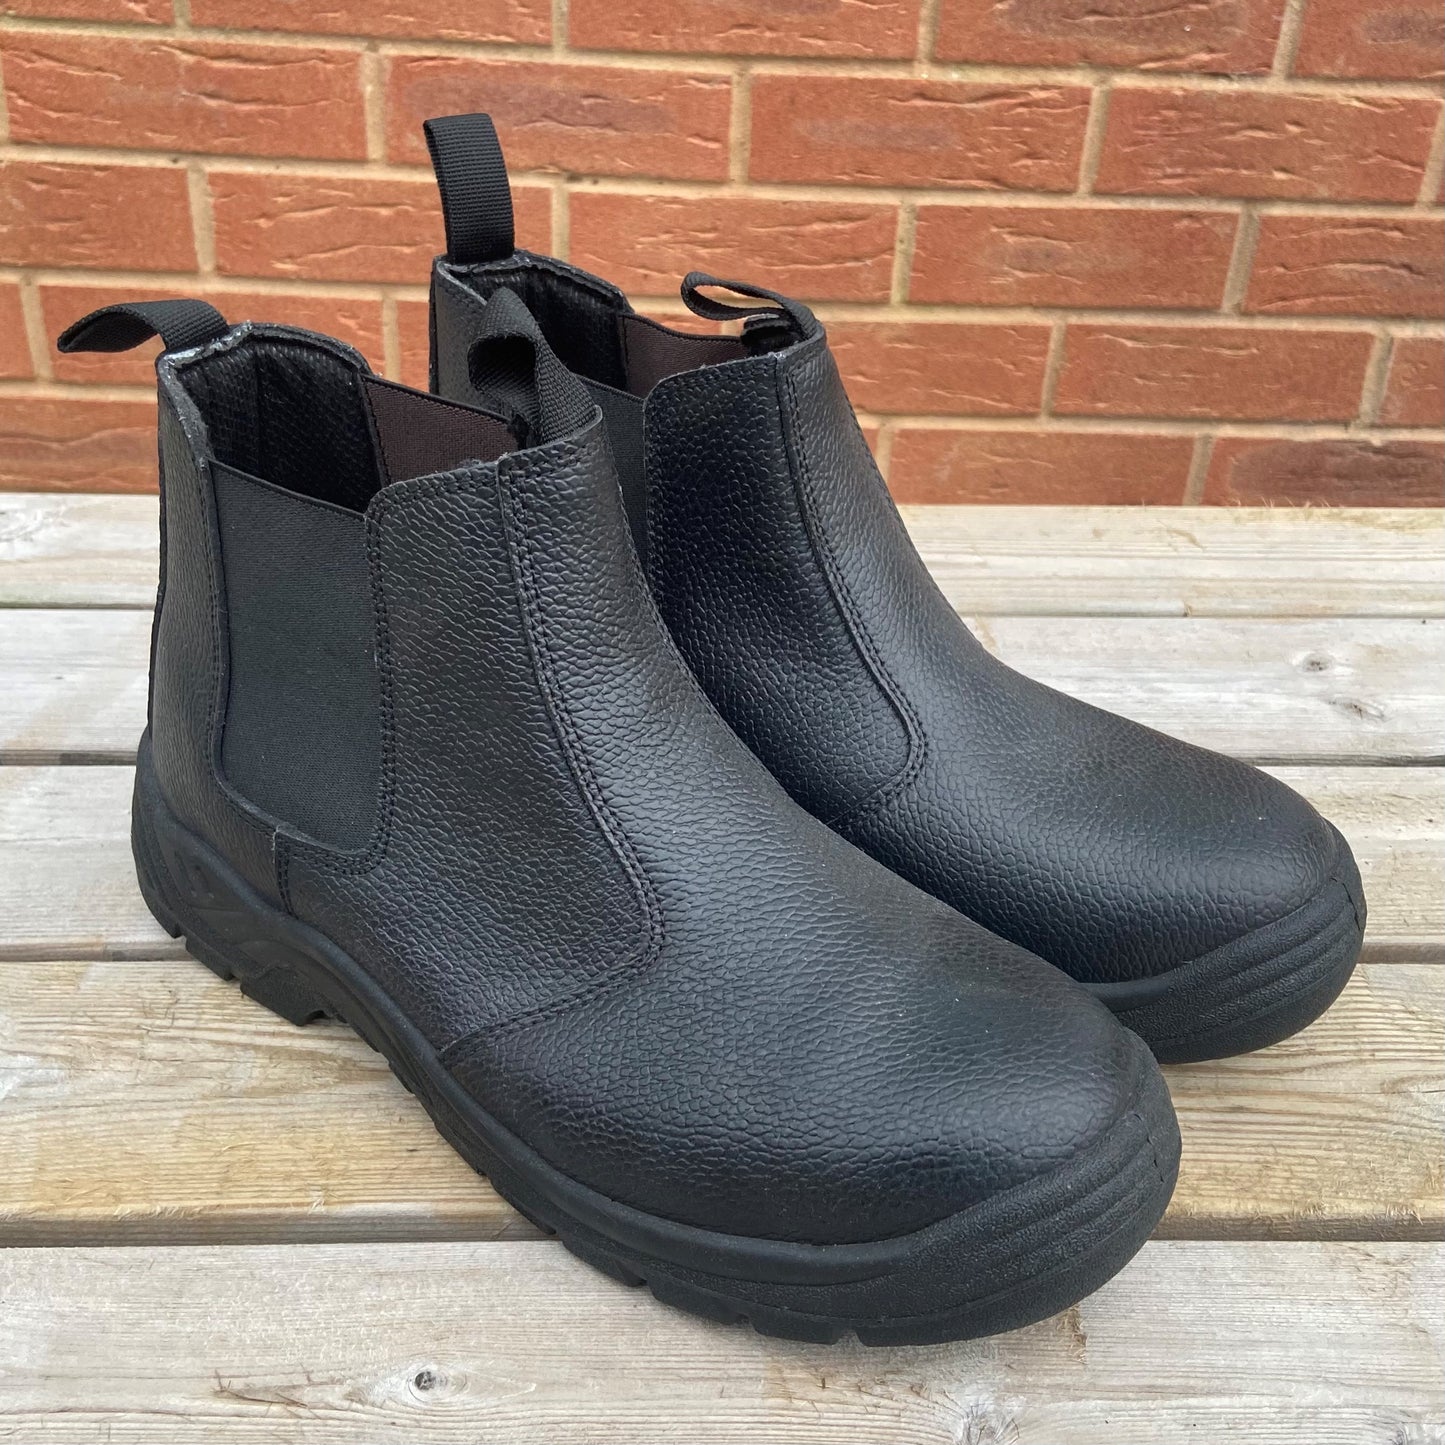 Size 7 to 11 Dealer Boots